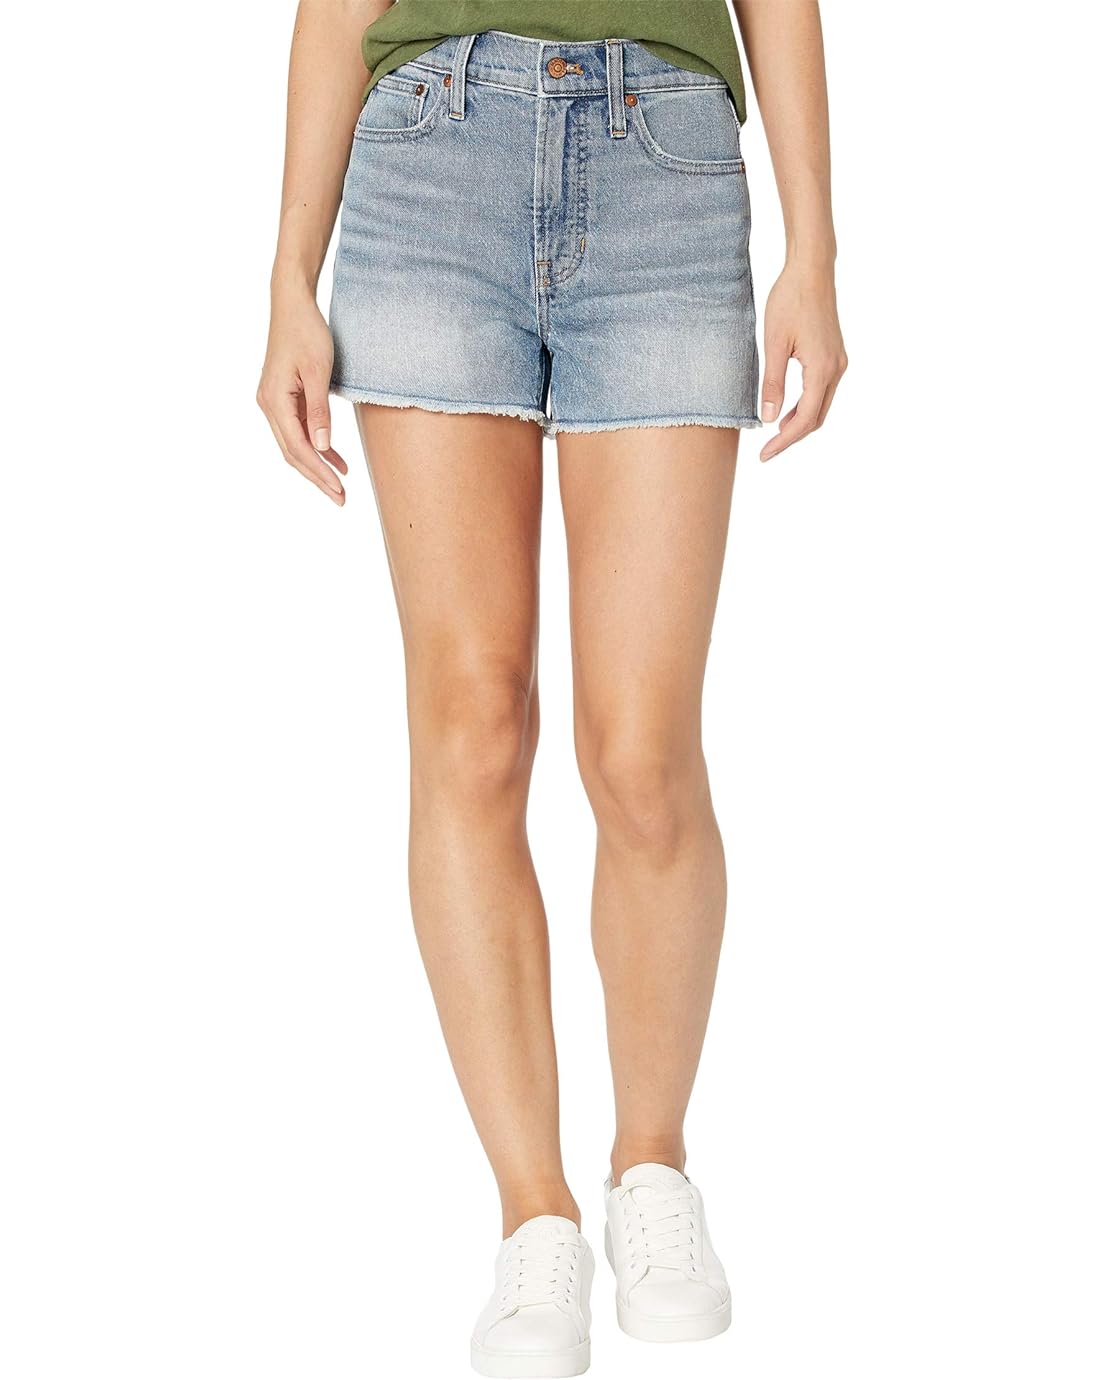 Madewell The Perfect Jean Short in Balsam Wash: TENCEL Denim Edition